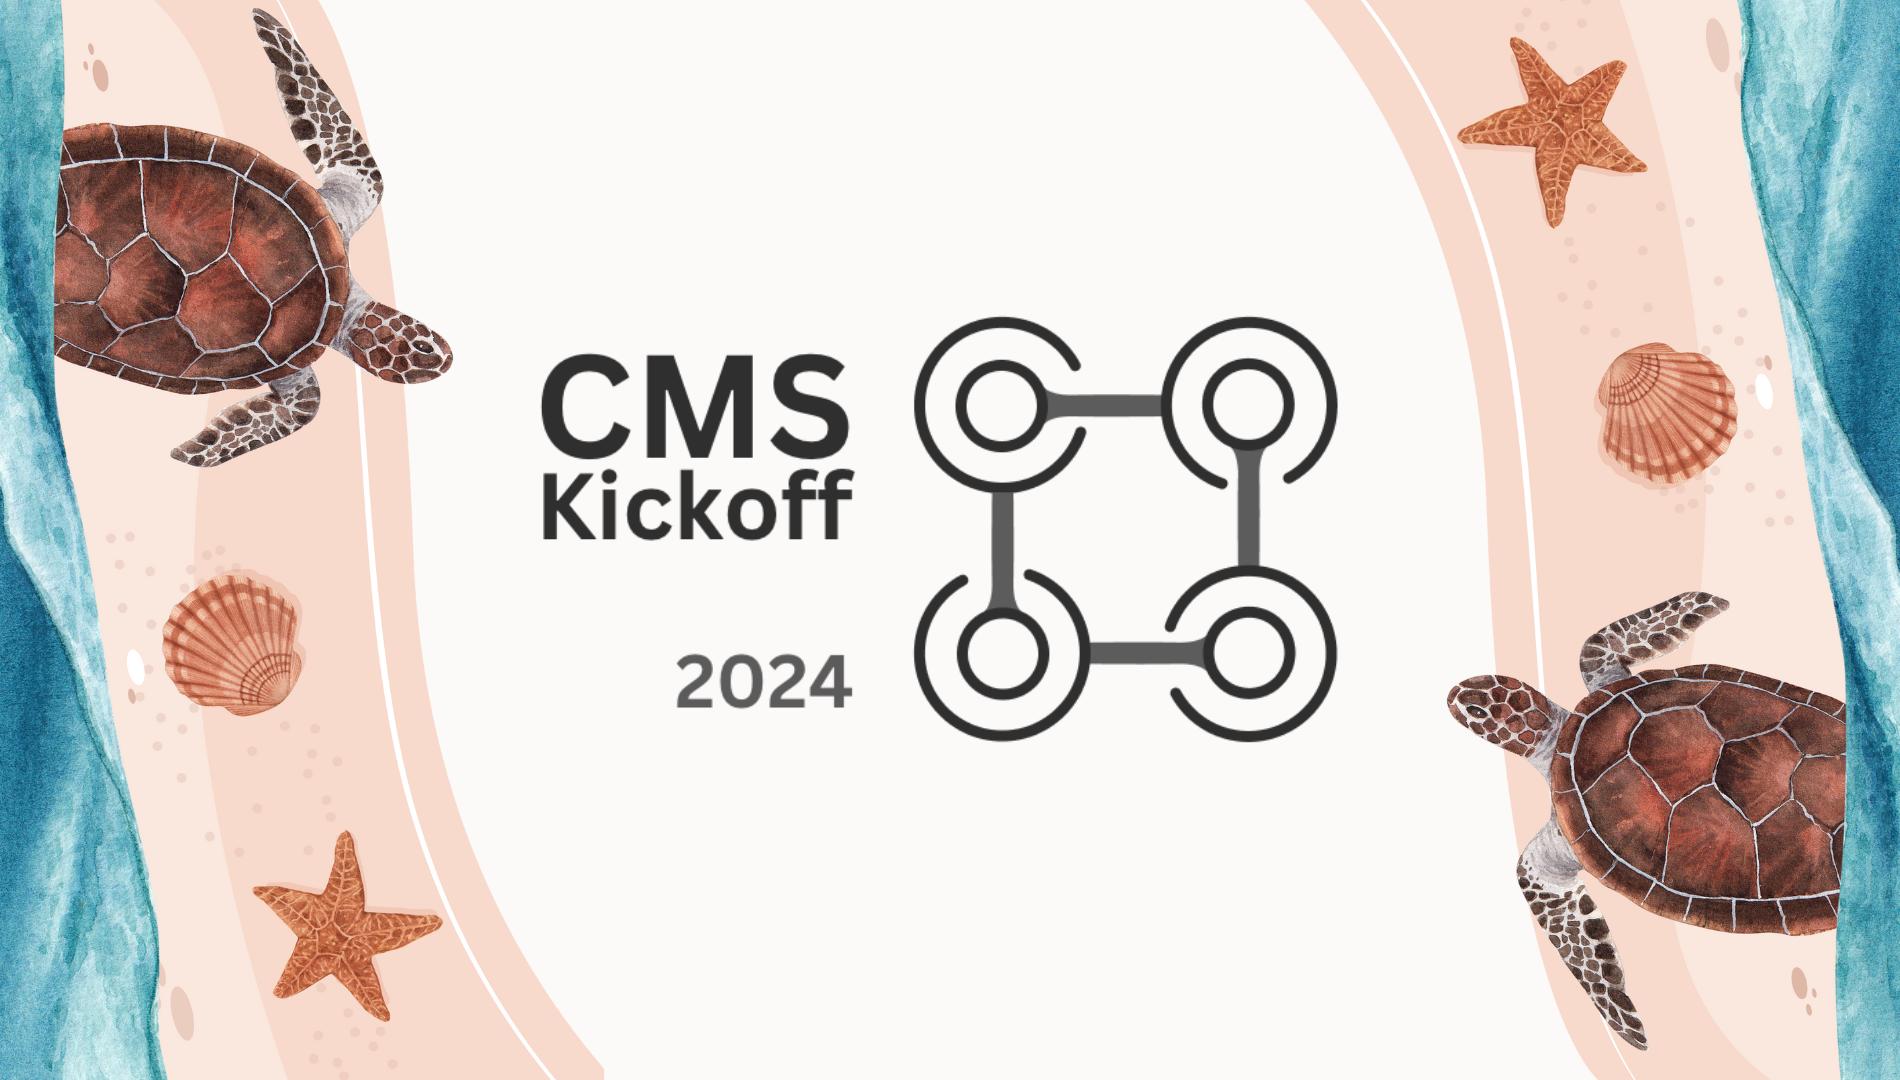 Join Us at CMS Kickoff 2024 - A Premier Gathering for CMS Enthusiasts!